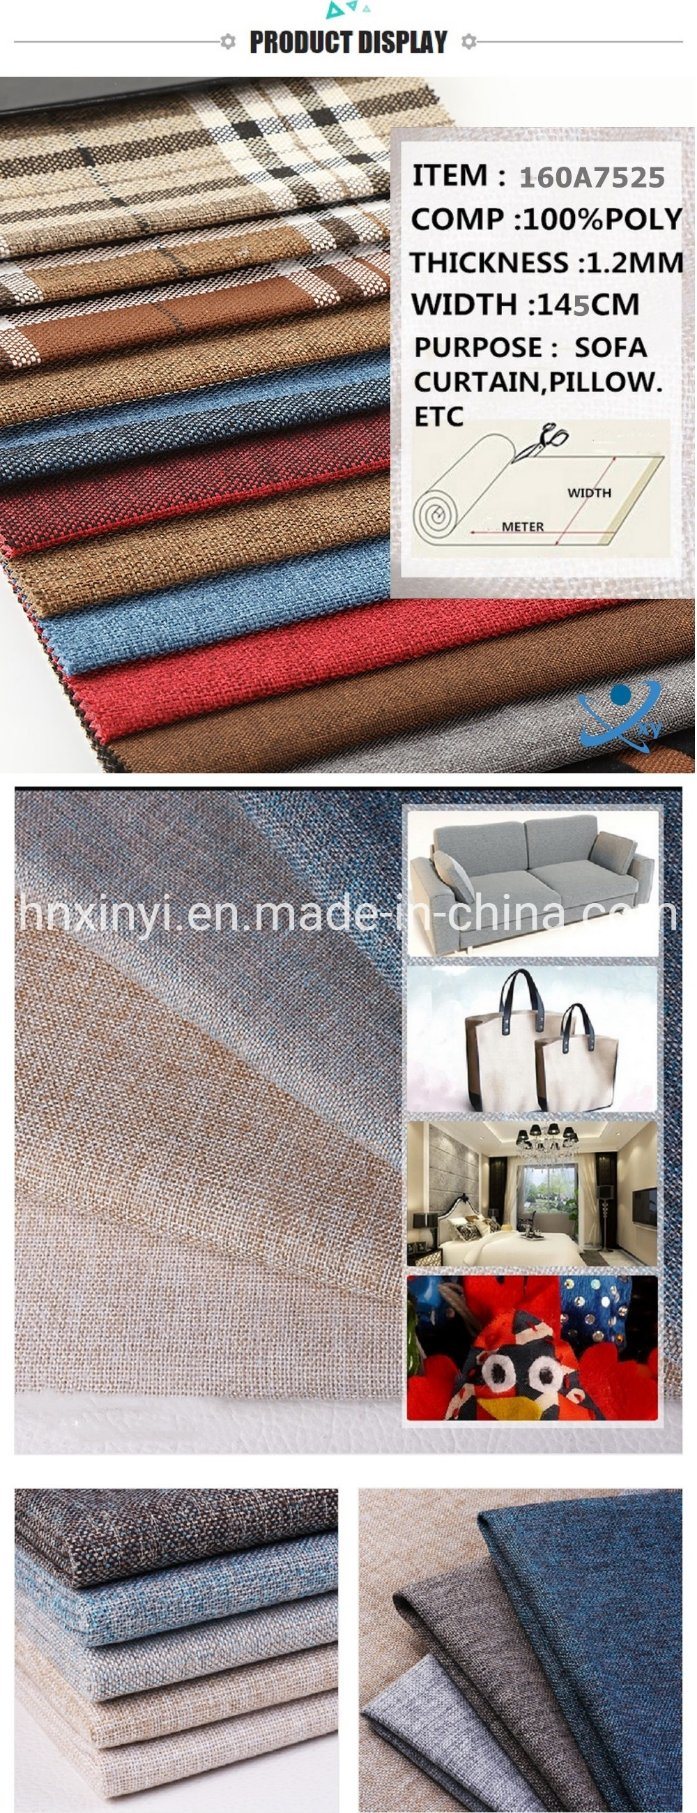 China Supplier Wholesale Linen Cotton Fabric for Sofa